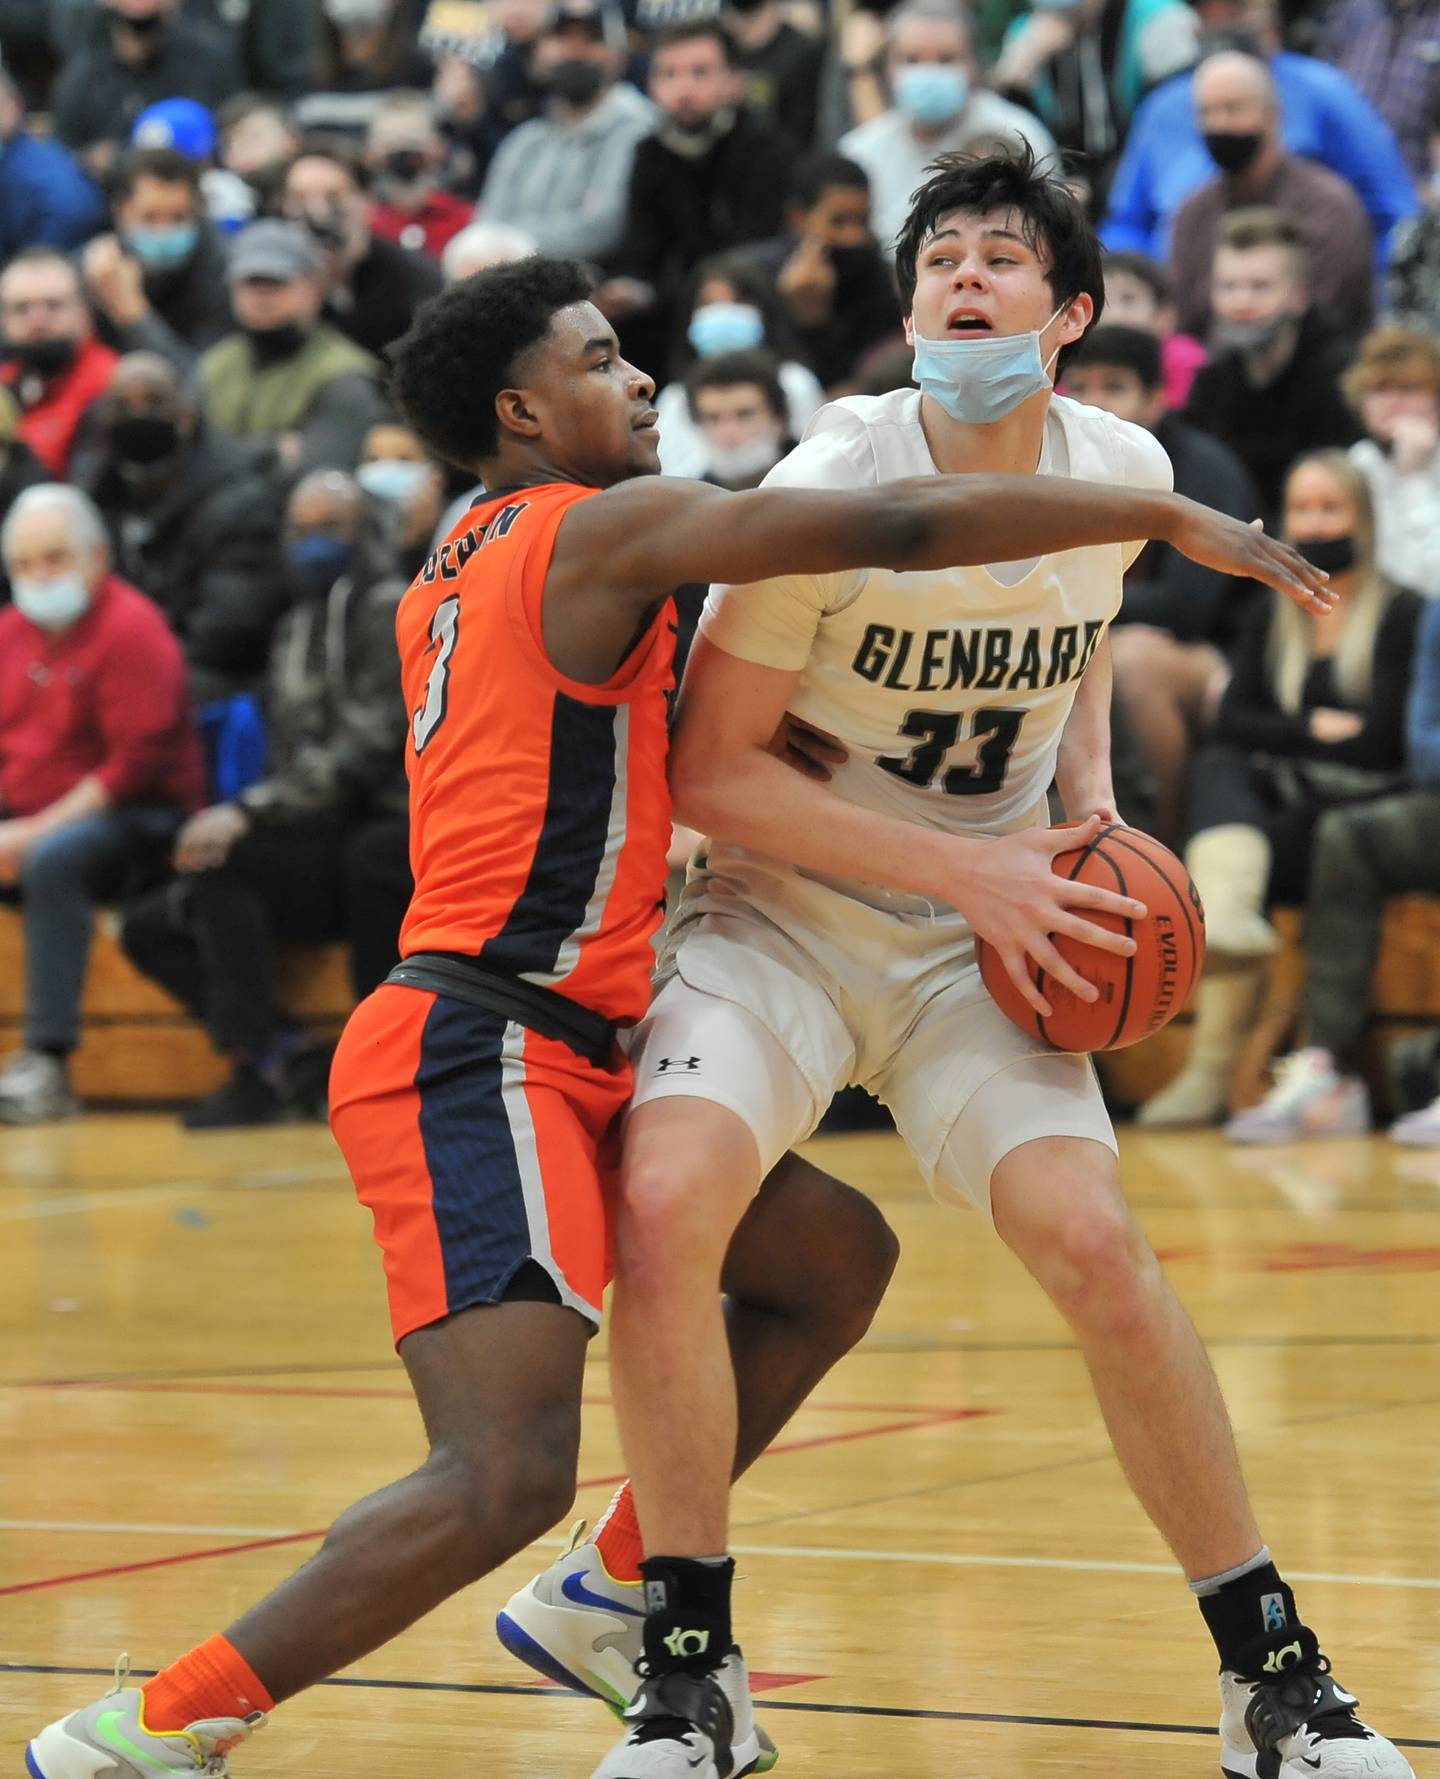 Glenbard West's Bobby Durkin (33) moves to the basket while tightly guarded by Whitney Young's Dalen Davis during a game on Jan. 22, 2022 at Benet Academy in Lisle.